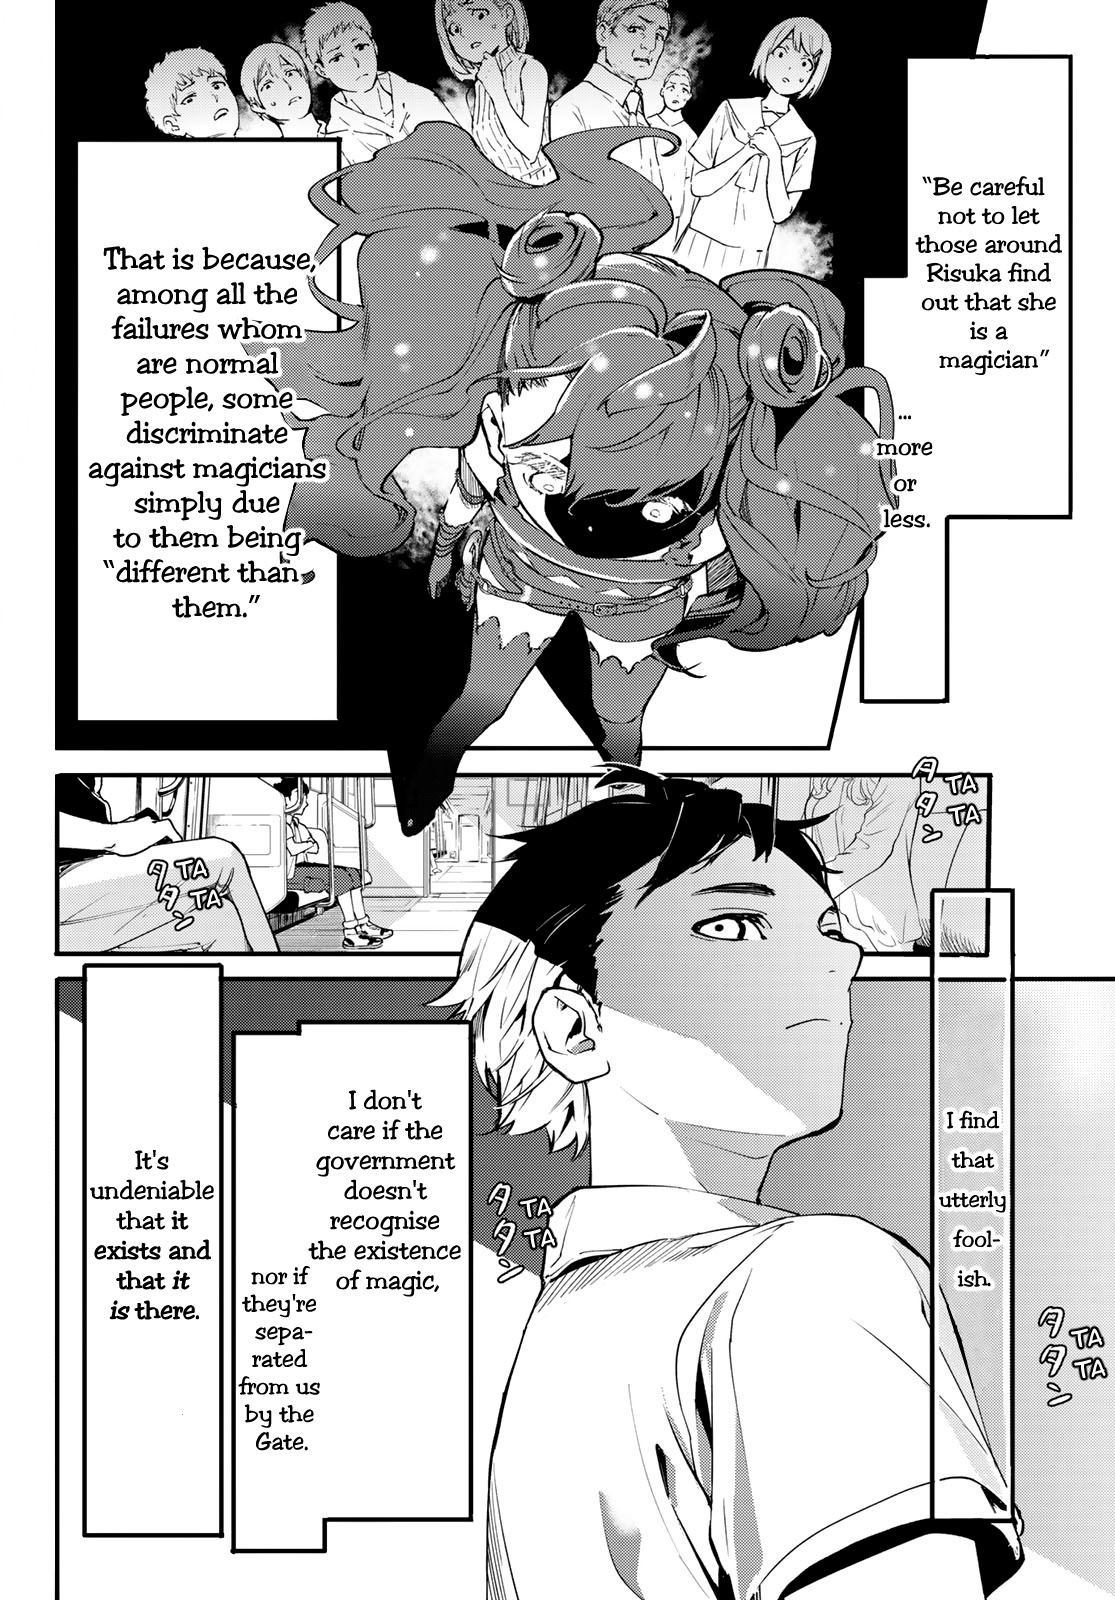 Shin Honkaku Mahou Shoujo Risuka Vol.1 Chapter 2: Easy Magic Cannot Be Used. - They Cannot Help But Test Their Power - Picture 3